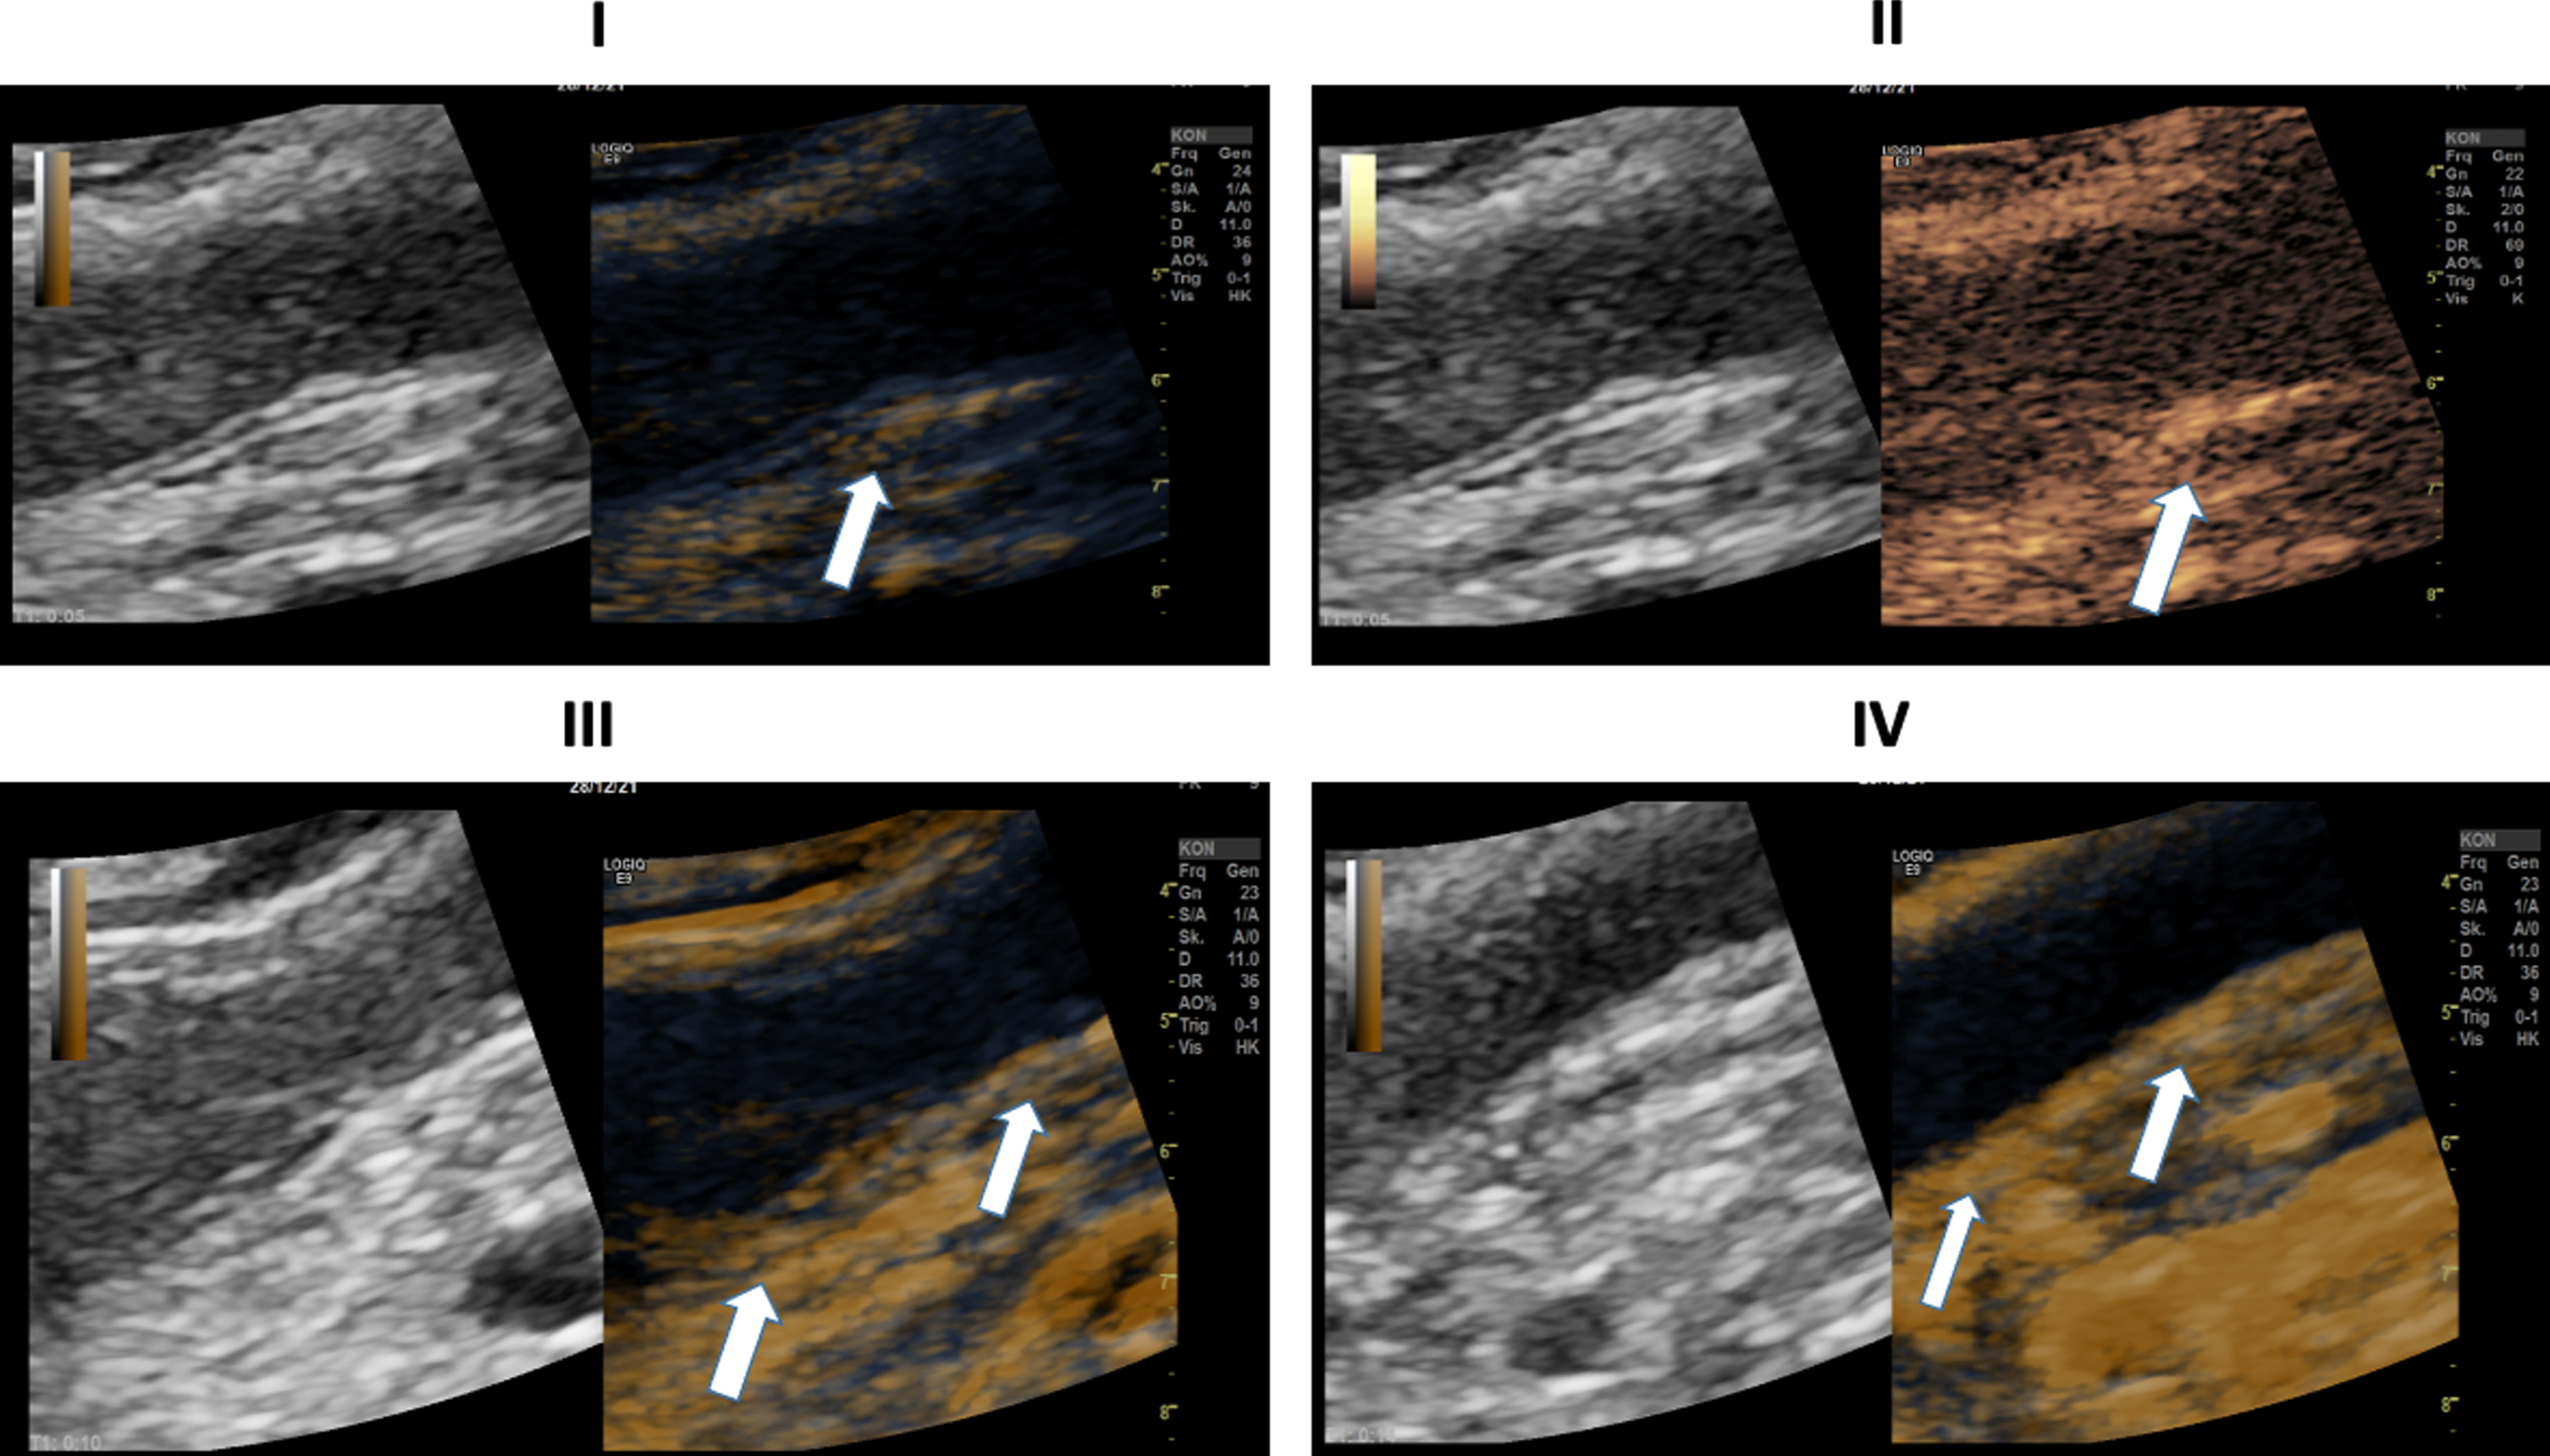 Ultrasound images of a 45-years-old patient with a severe COVID-19 Infection. I: CEUS image showing early, pronounced and especially segmental, transmural arterial hyperenhancement of the intestinal wall (white arrows) 5 seconds after SonoVue application. II: CEUS image showing early, strong, and especially segmental, transmural arterial hyperenhancement of the intestinal wall (white arrows) 5 seconds after SonoVue application. III: CEUS Image shows long-distance, marked contrast uptake across all intestinal wall layers 10 seconds after SonoVue application. IV: CEUS Image shows long-distance, distinct contrast uptake across all intestinal wall layers 14 seconds after SonoVue application.